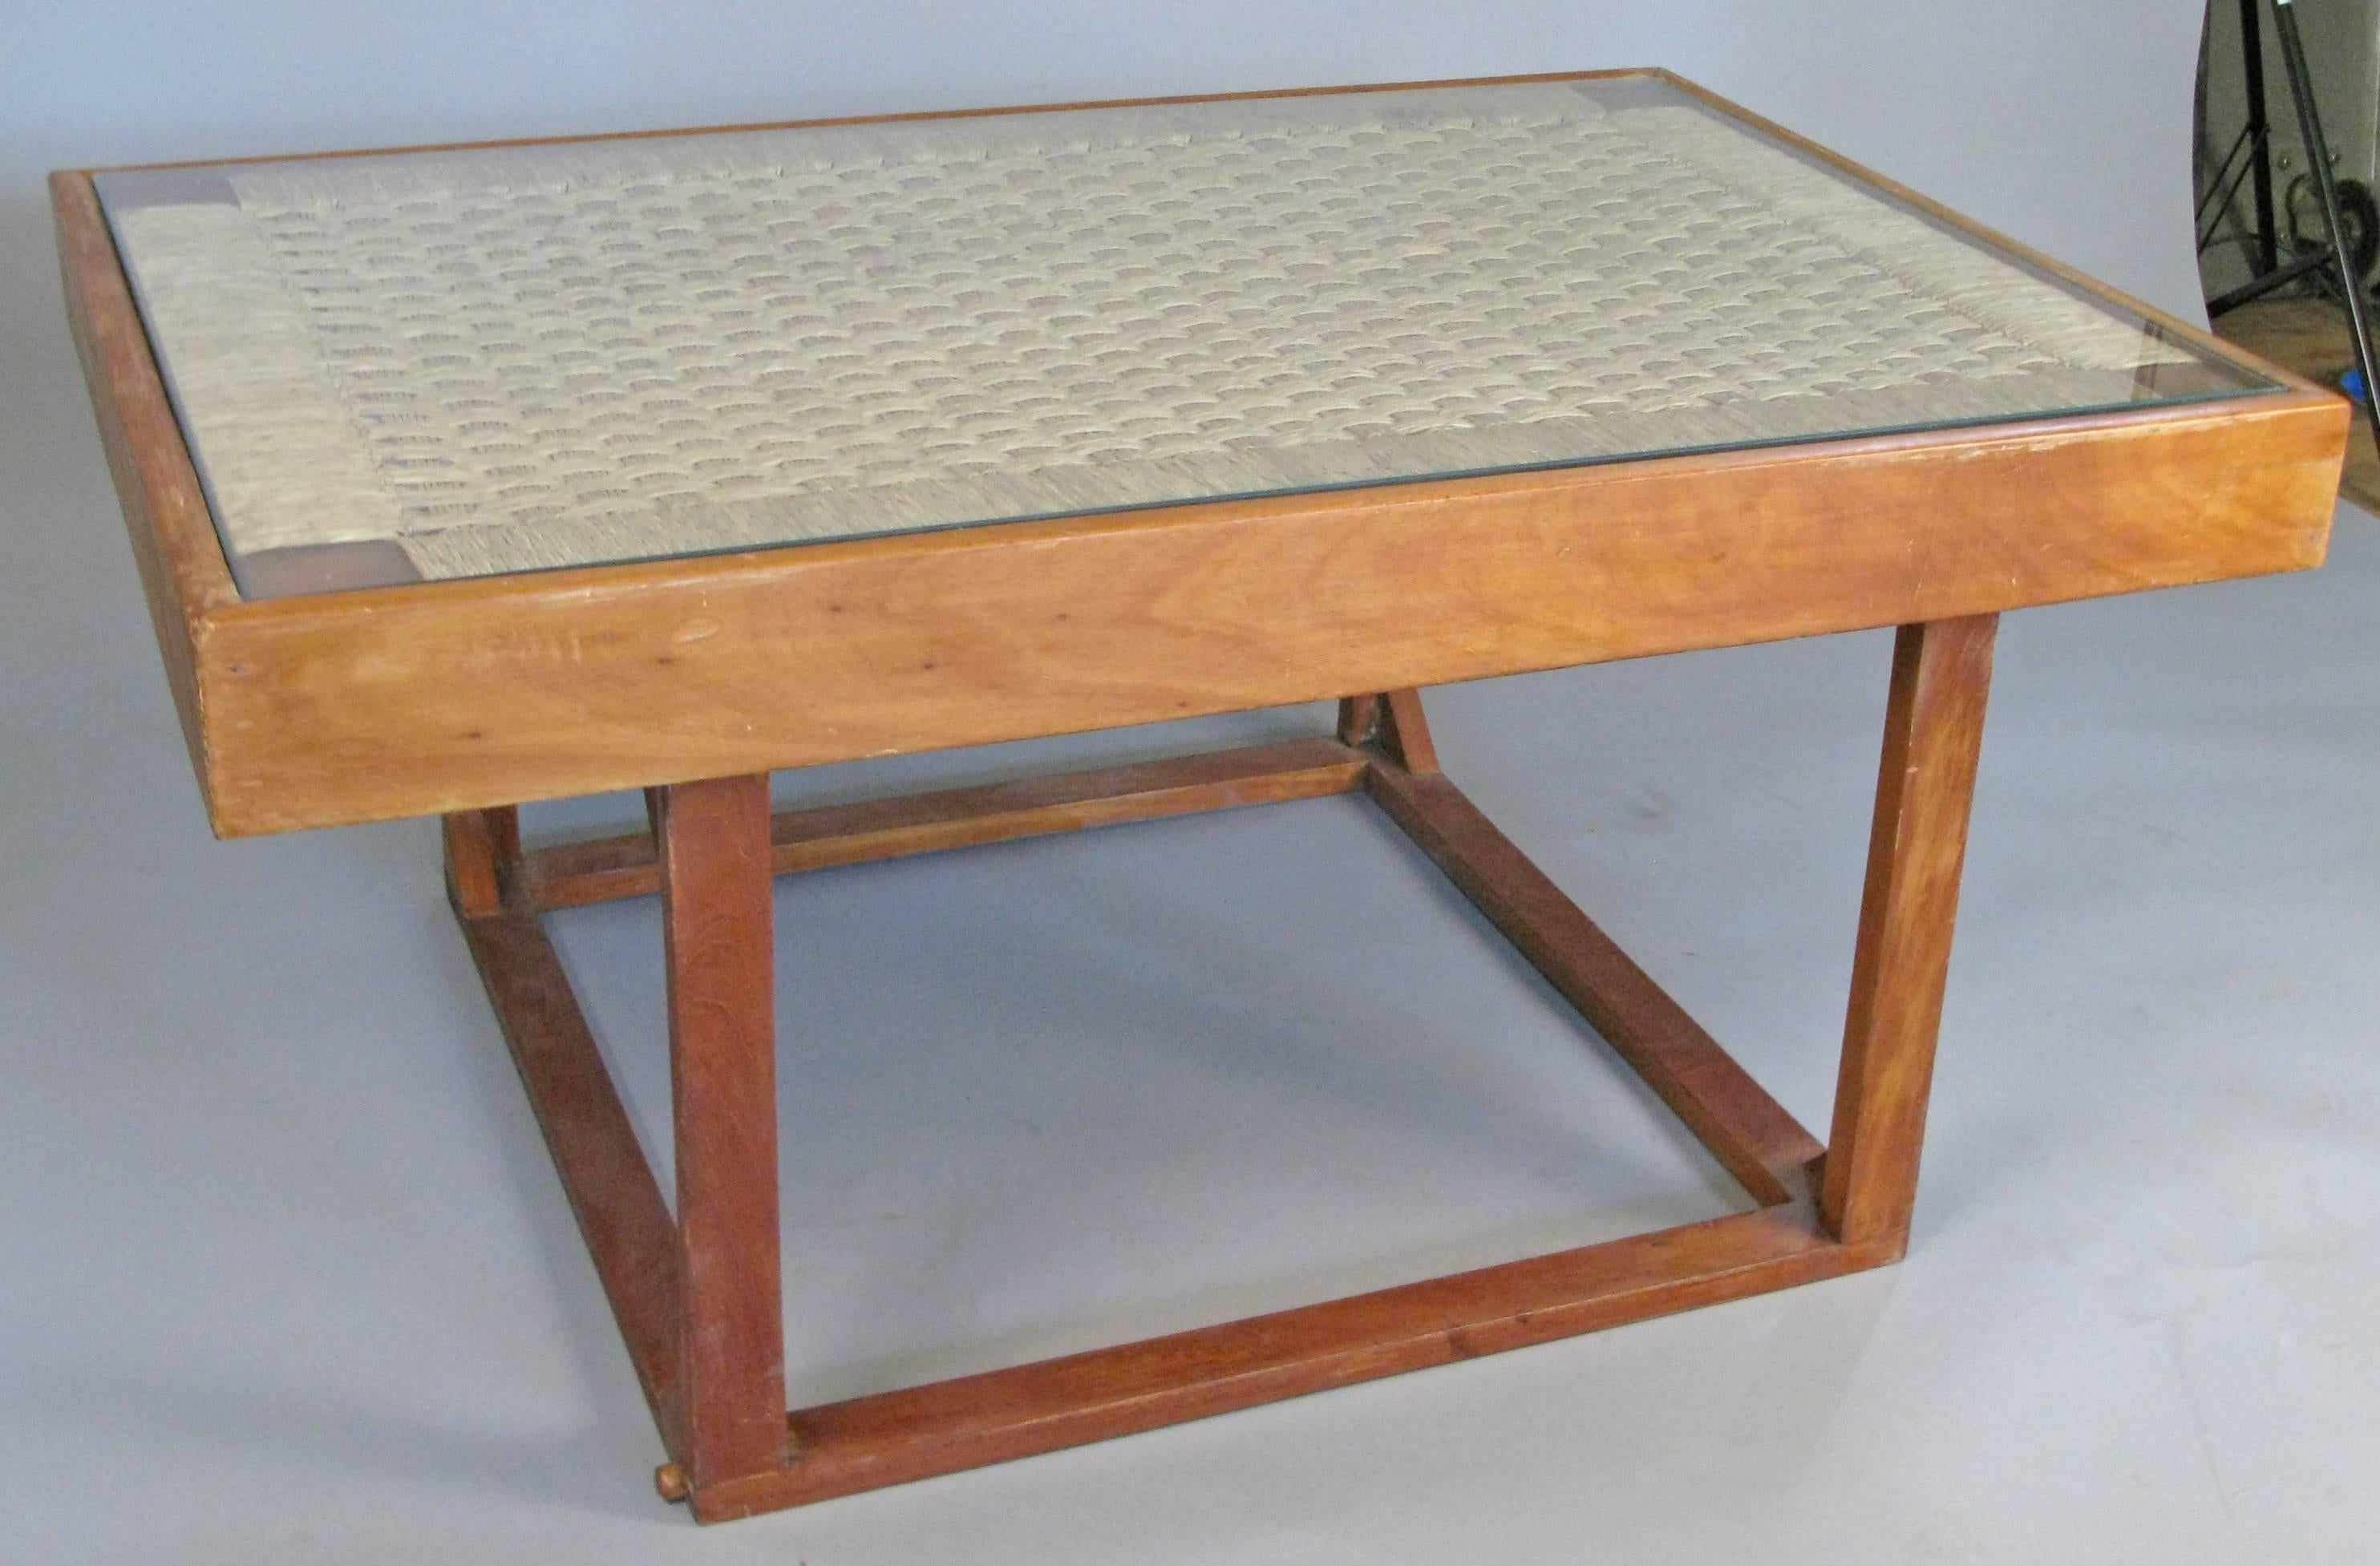 A beautiful and very unique oak base table from the 1950's, that converts from a low cocktail table to a higher console height table by attaching the base in two different configurations. has a very nice top with woven cord and a glass top. the